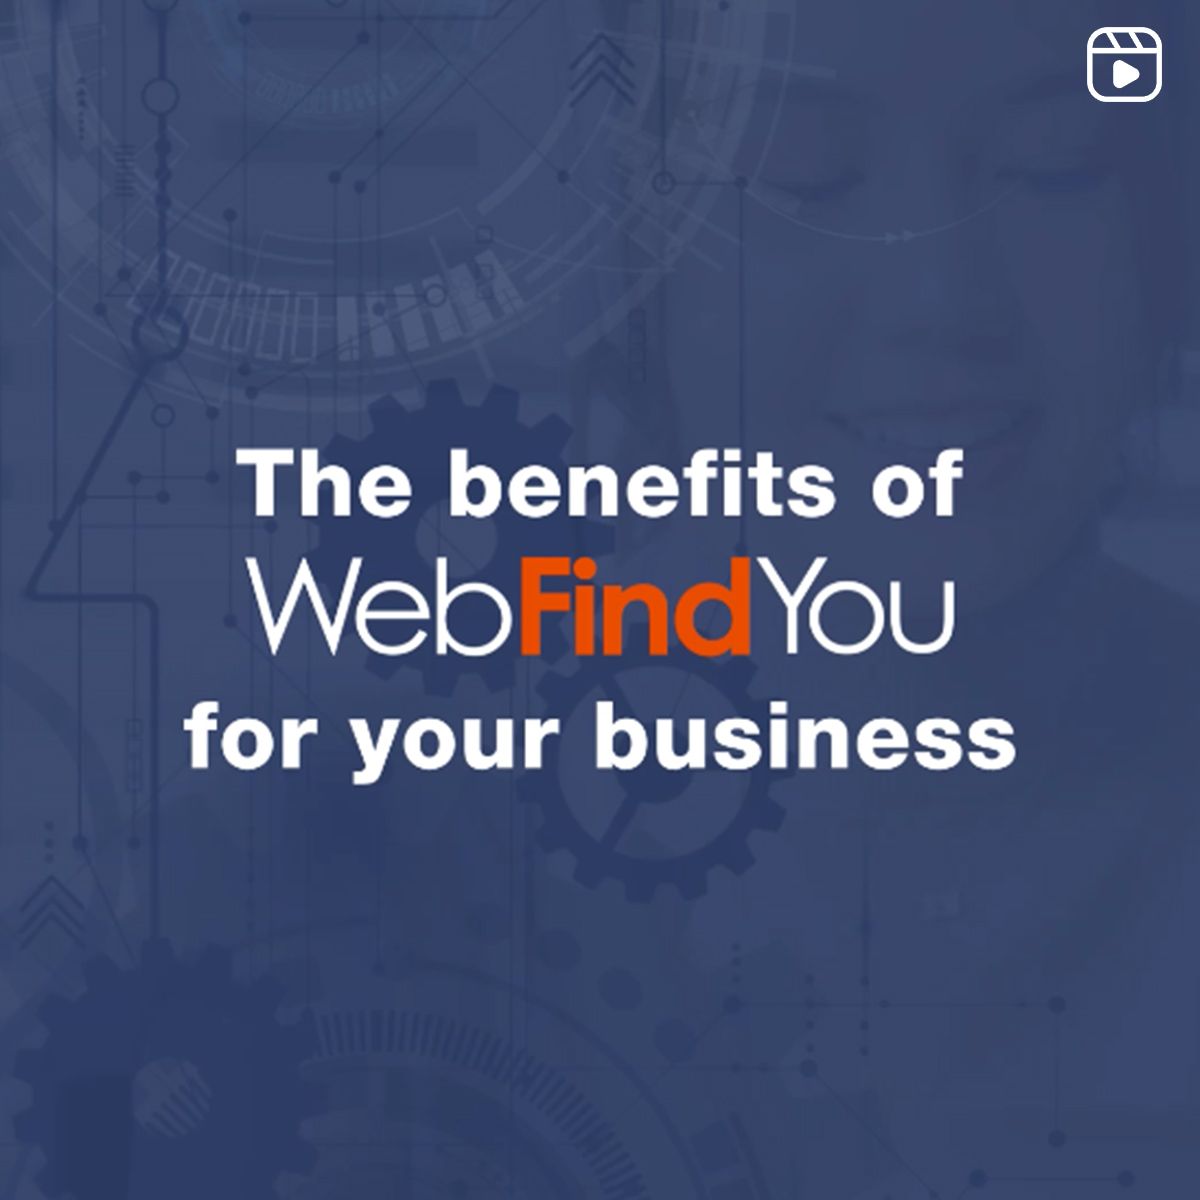 The benefits of WebFindYou for your business